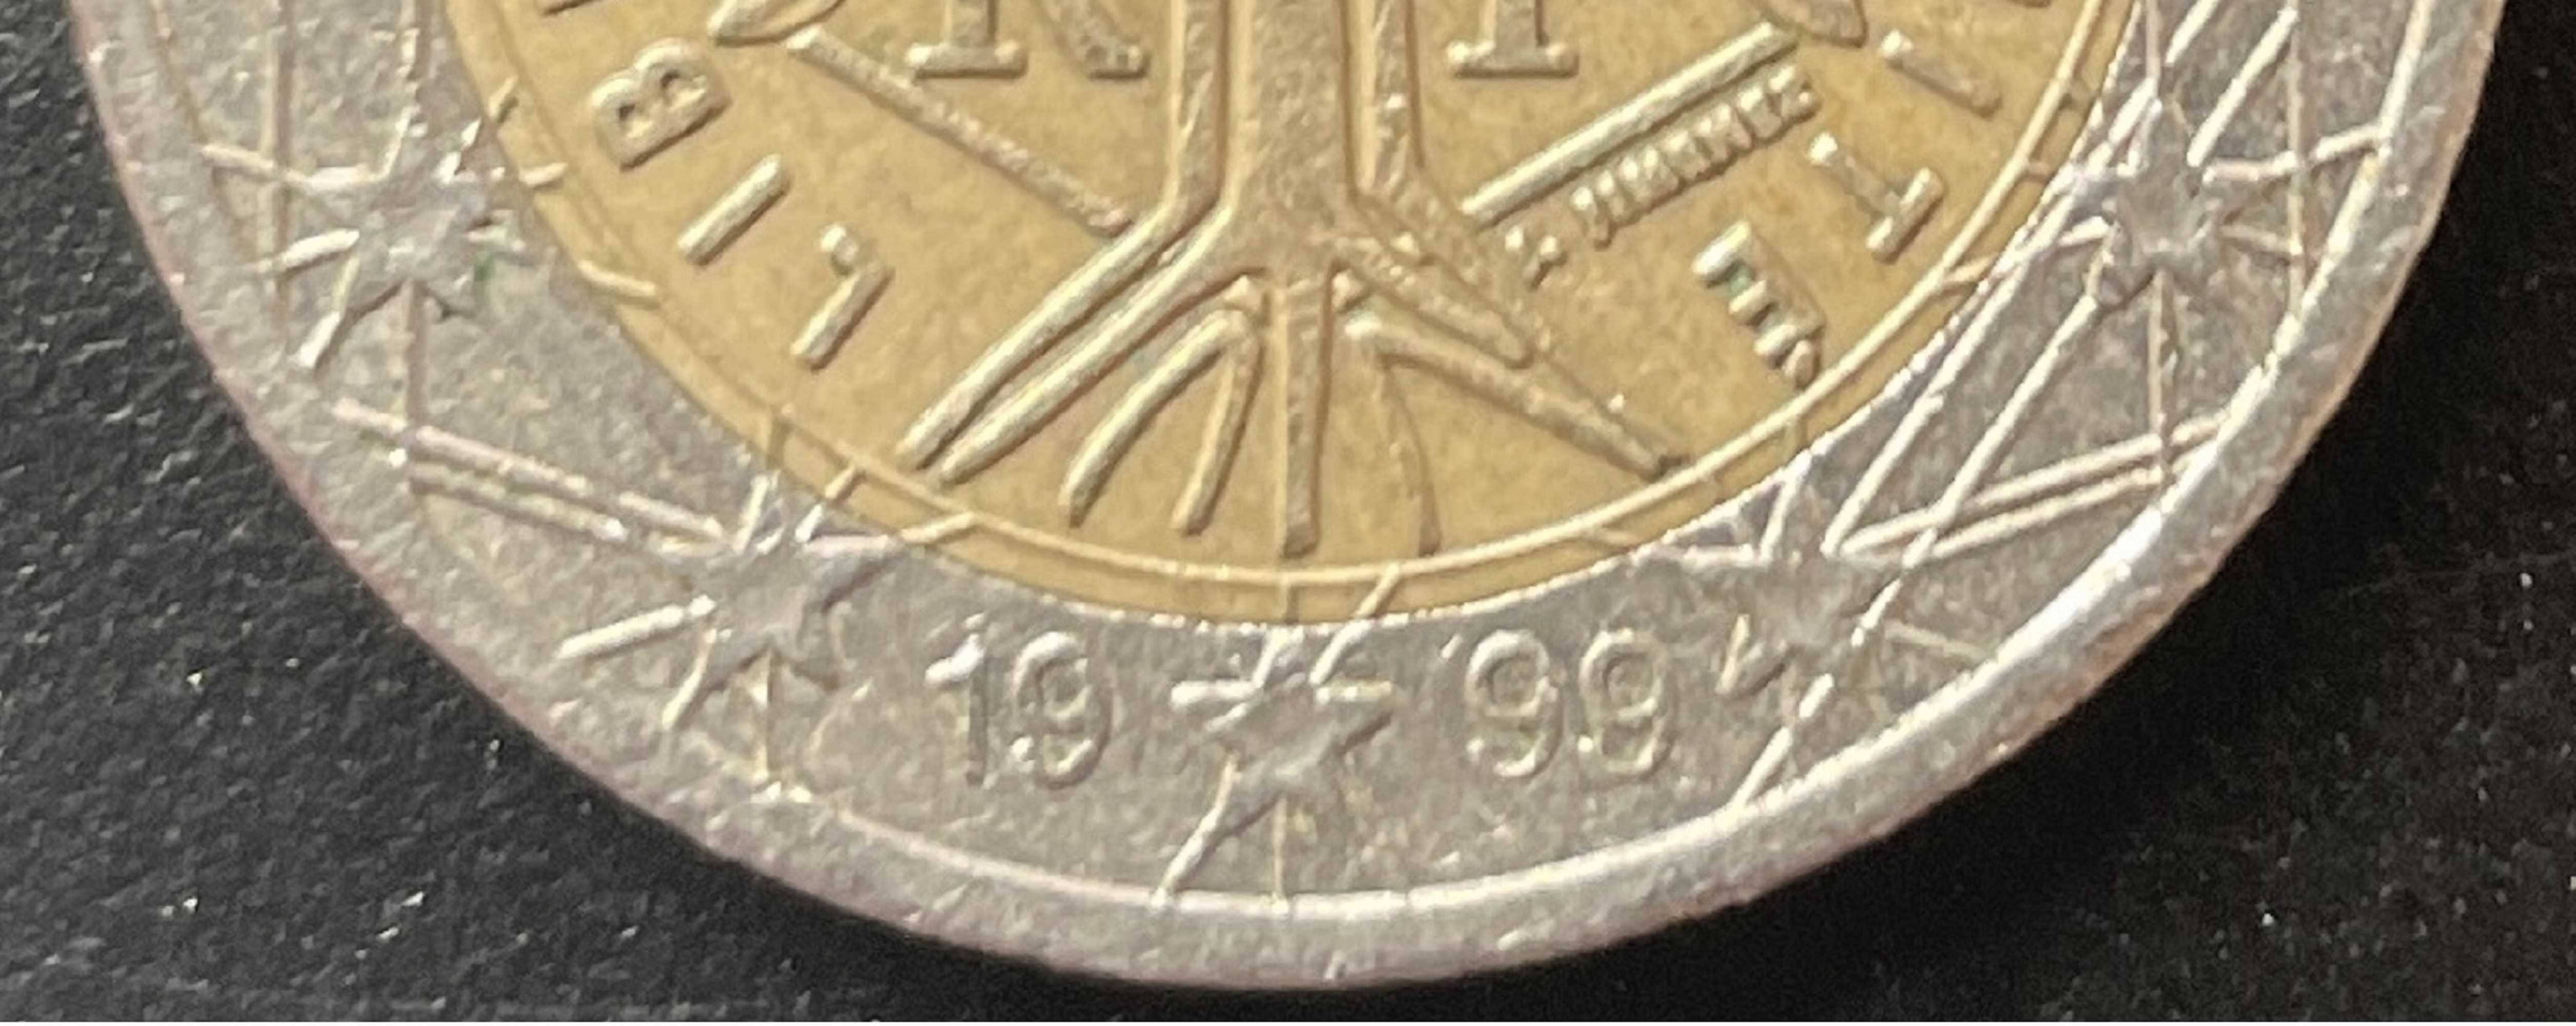 1999 French 2 Euro Coin - A Vintage Rarity from the 1990s